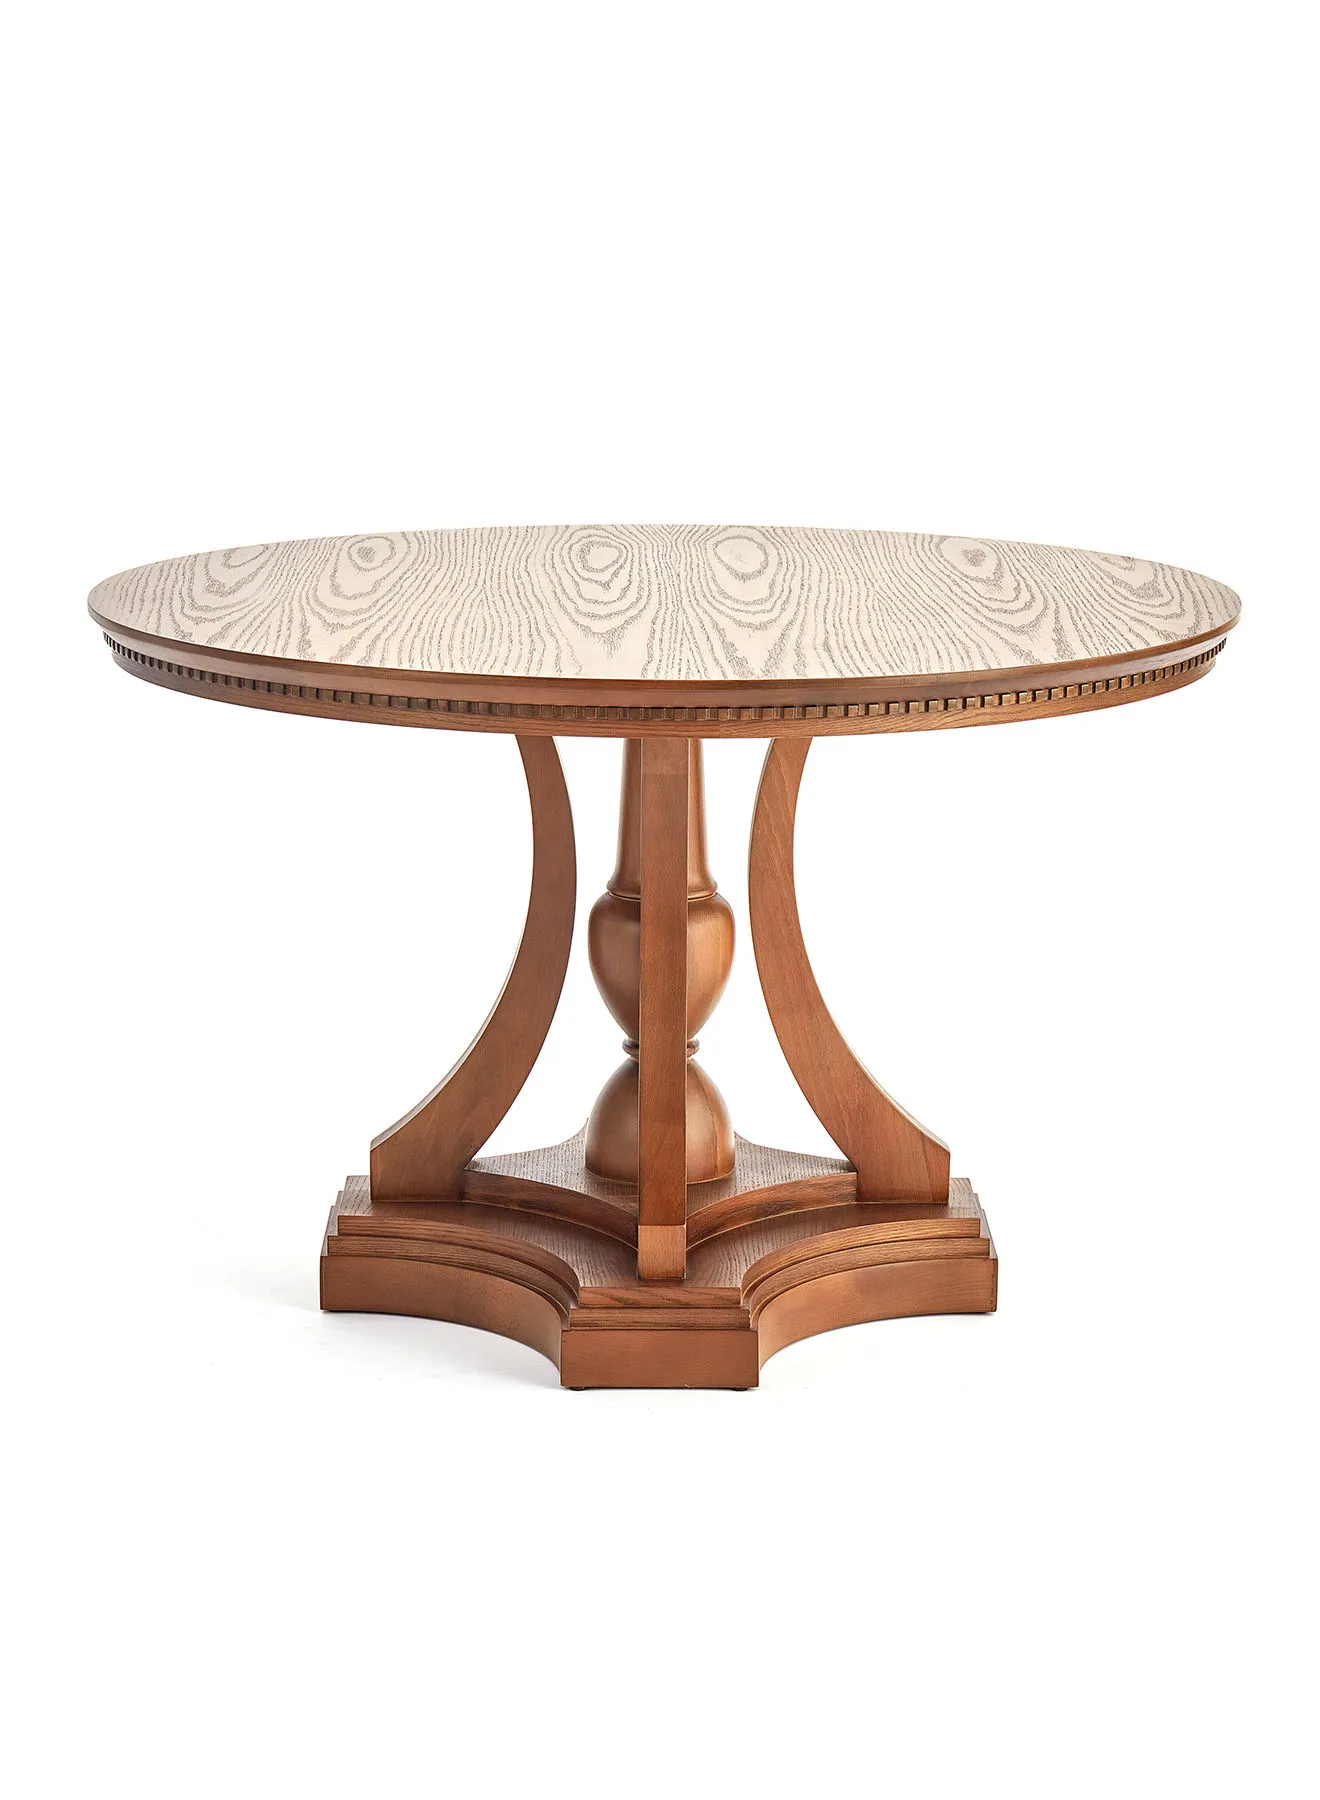 ebb & flow Dining Table Luxurious Brown Solid Wood Oak 1200 X 760 Round